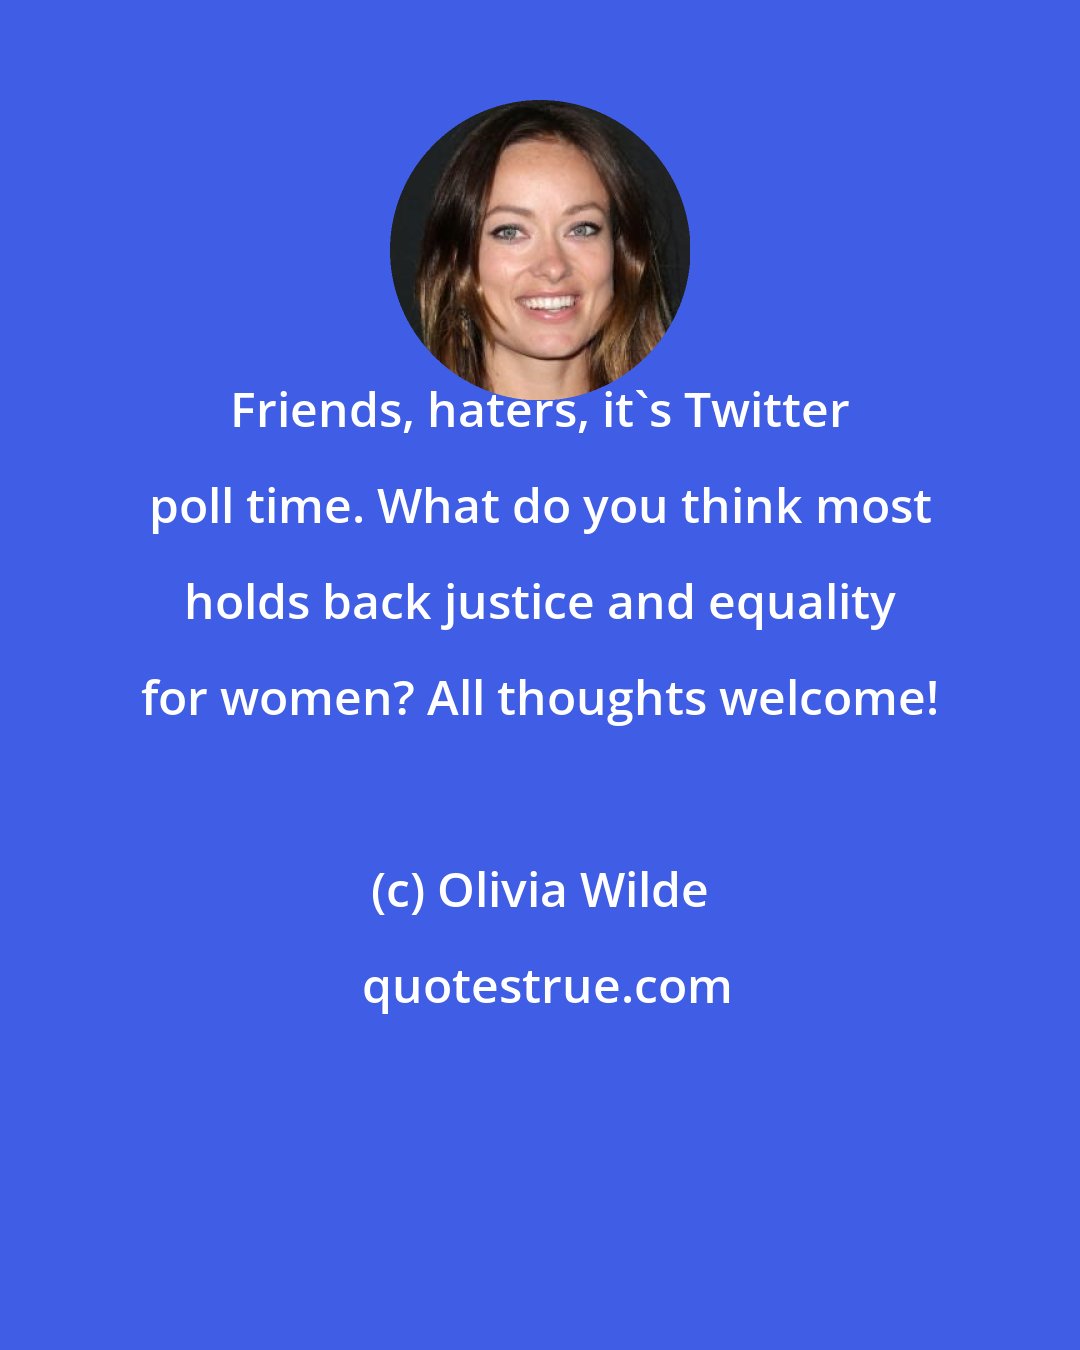 Olivia Wilde: Friends, haters, it's Twitter poll time. What do you think most holds back justice and equality for women? All thoughts welcome!